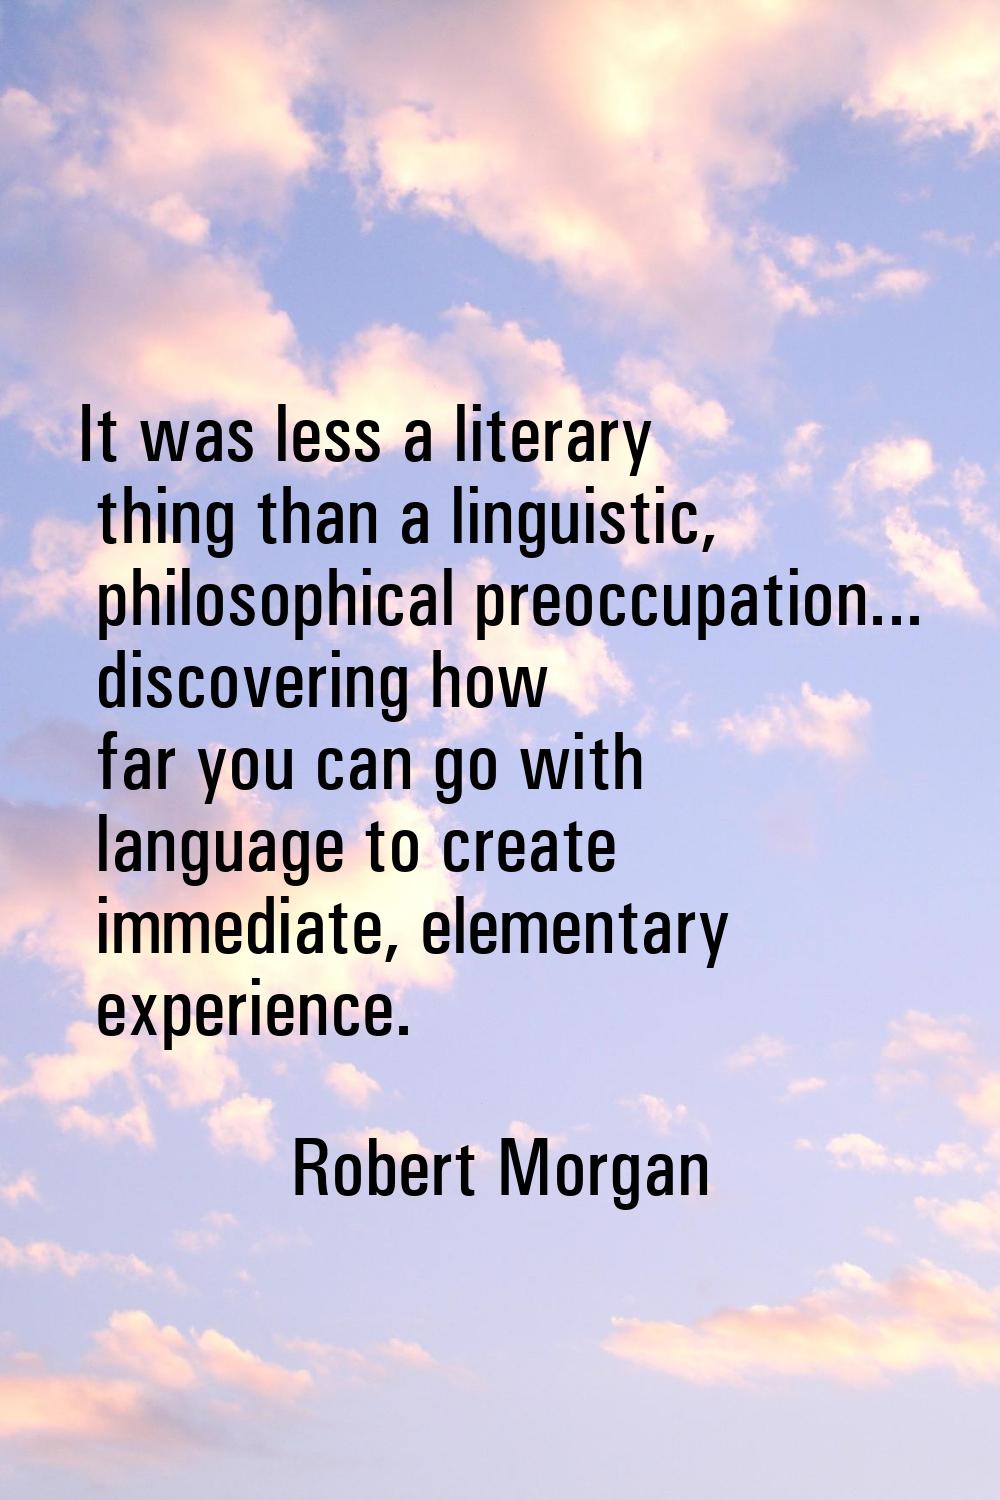 It was less a literary thing than a linguistic, philosophical preoccupation... discovering how far 